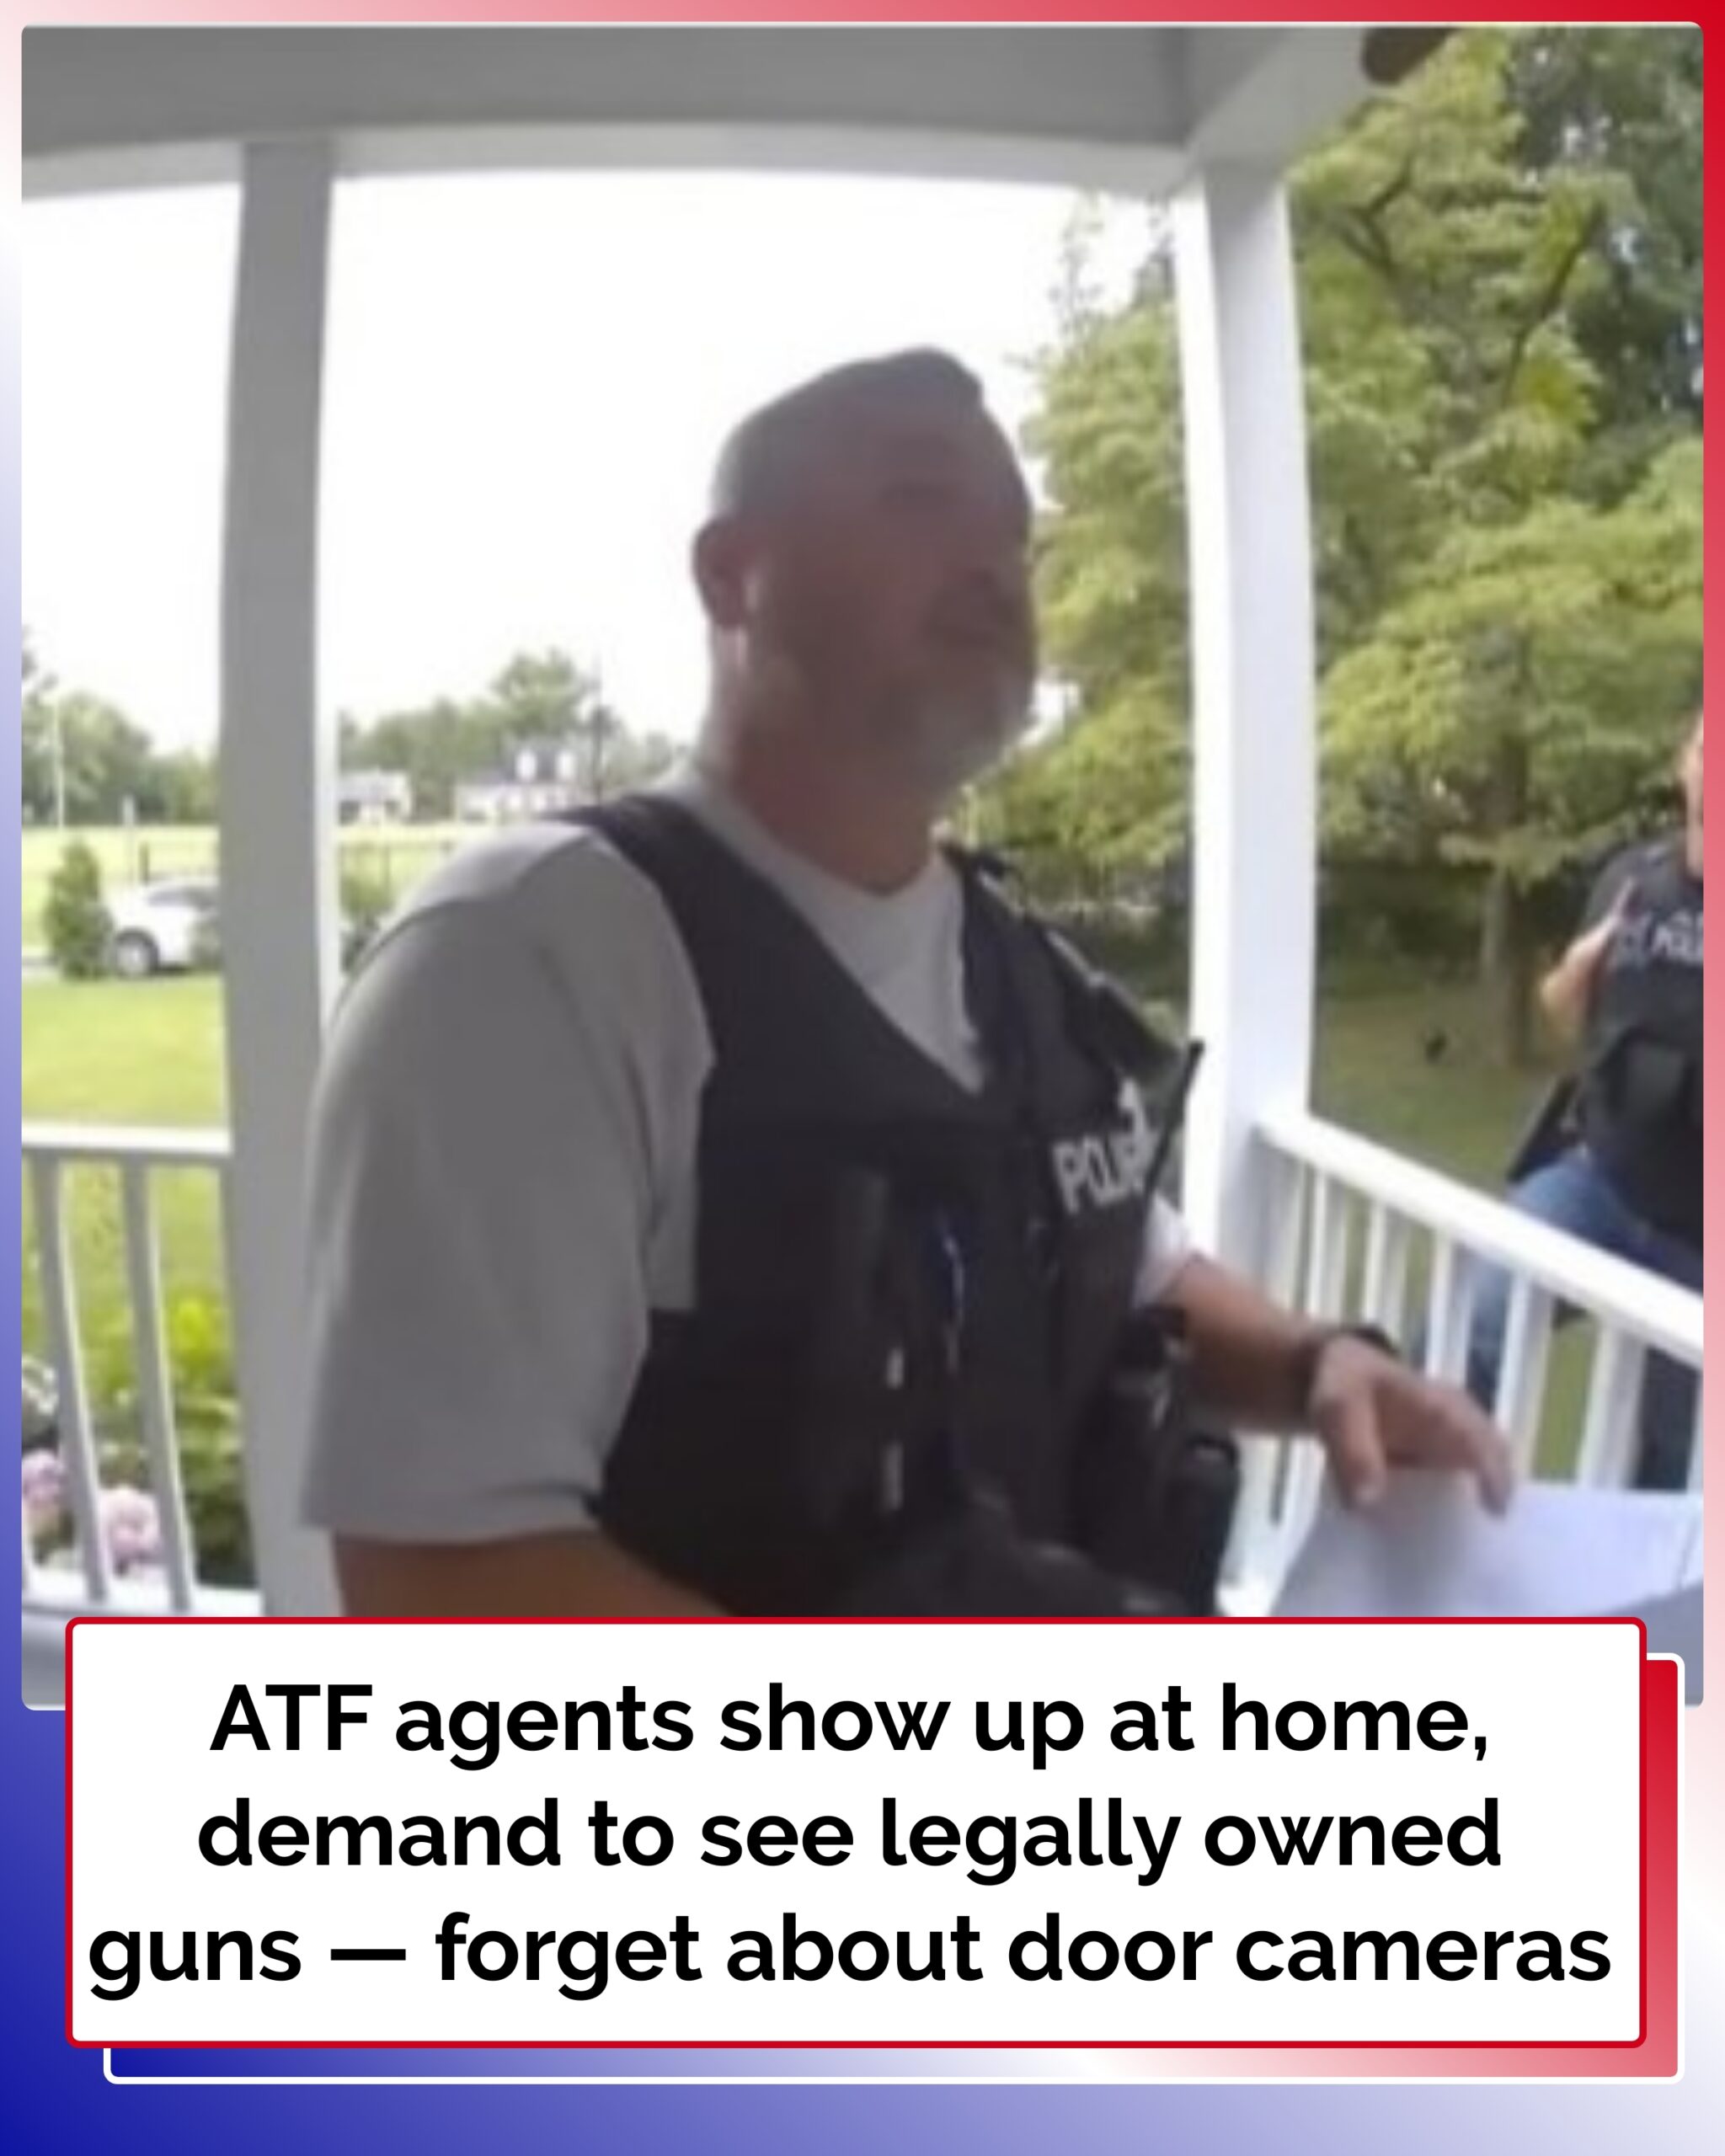 ATF Agents Show Up At Home, Demand To See Legally Owned Guns — Forget About Door Cameras